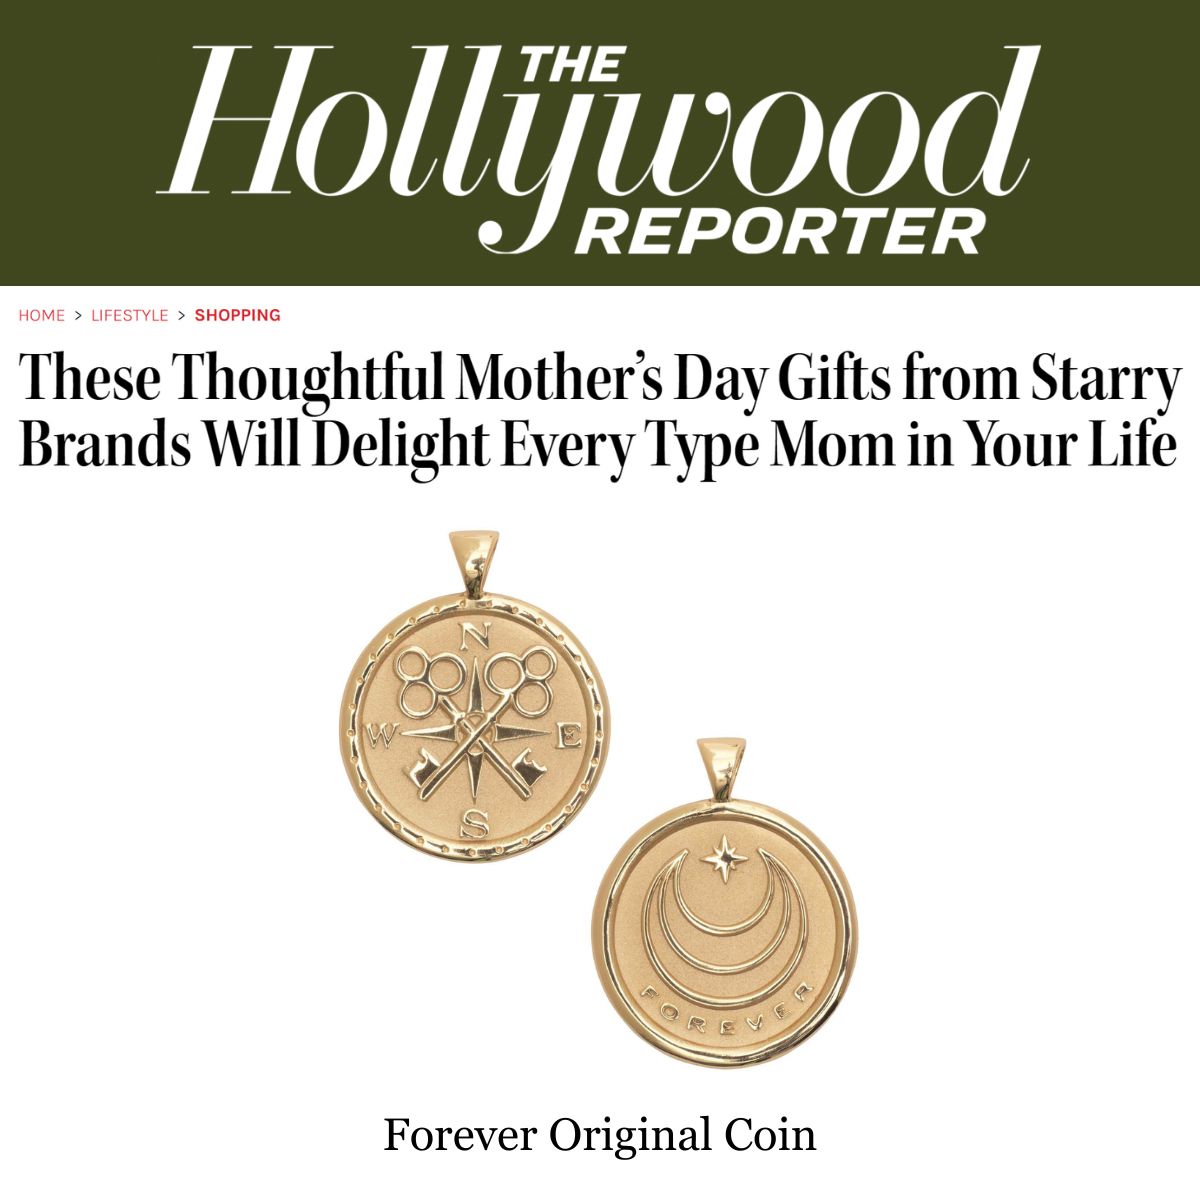 Press Highlight: Hollywood Reporter's "Thoughtful Mother's Day Gifts"